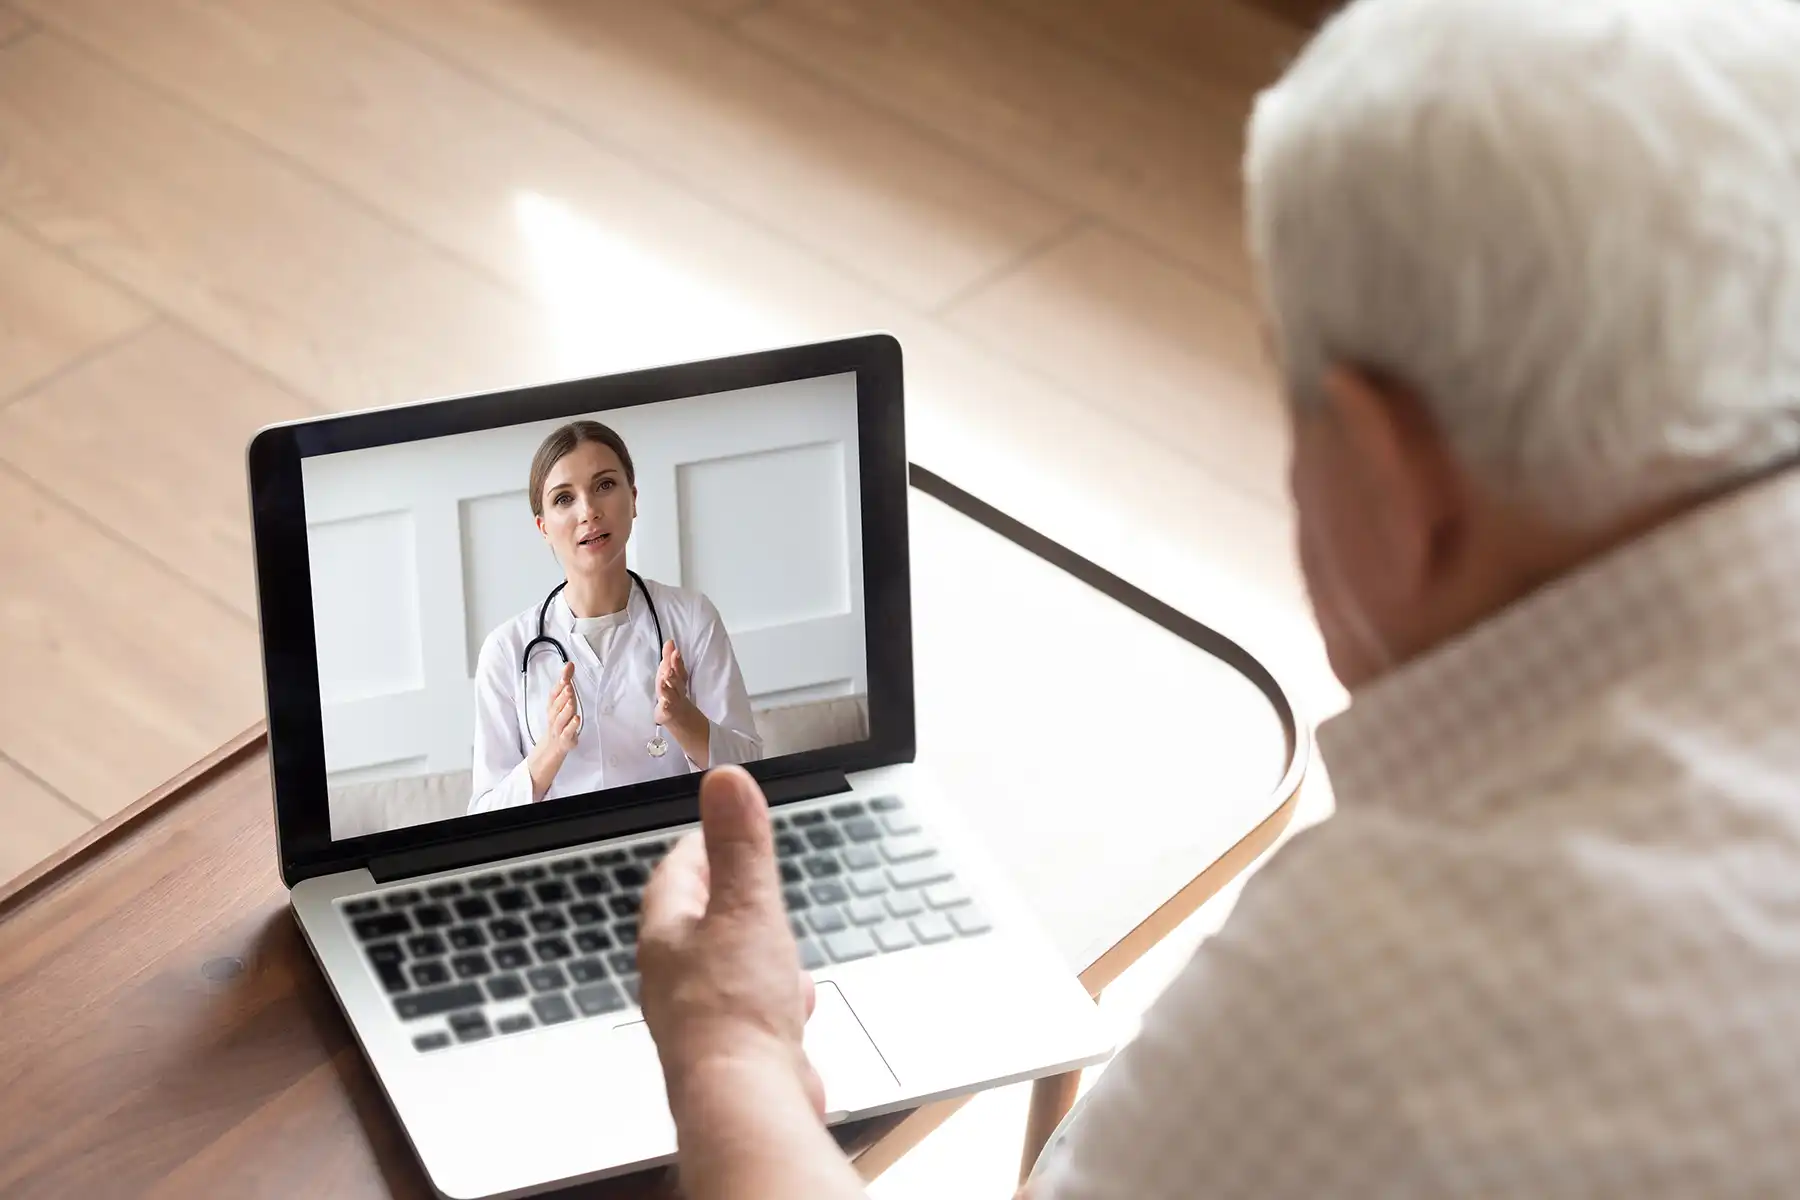 Older man on a virtual doctor's appointment from his laptop